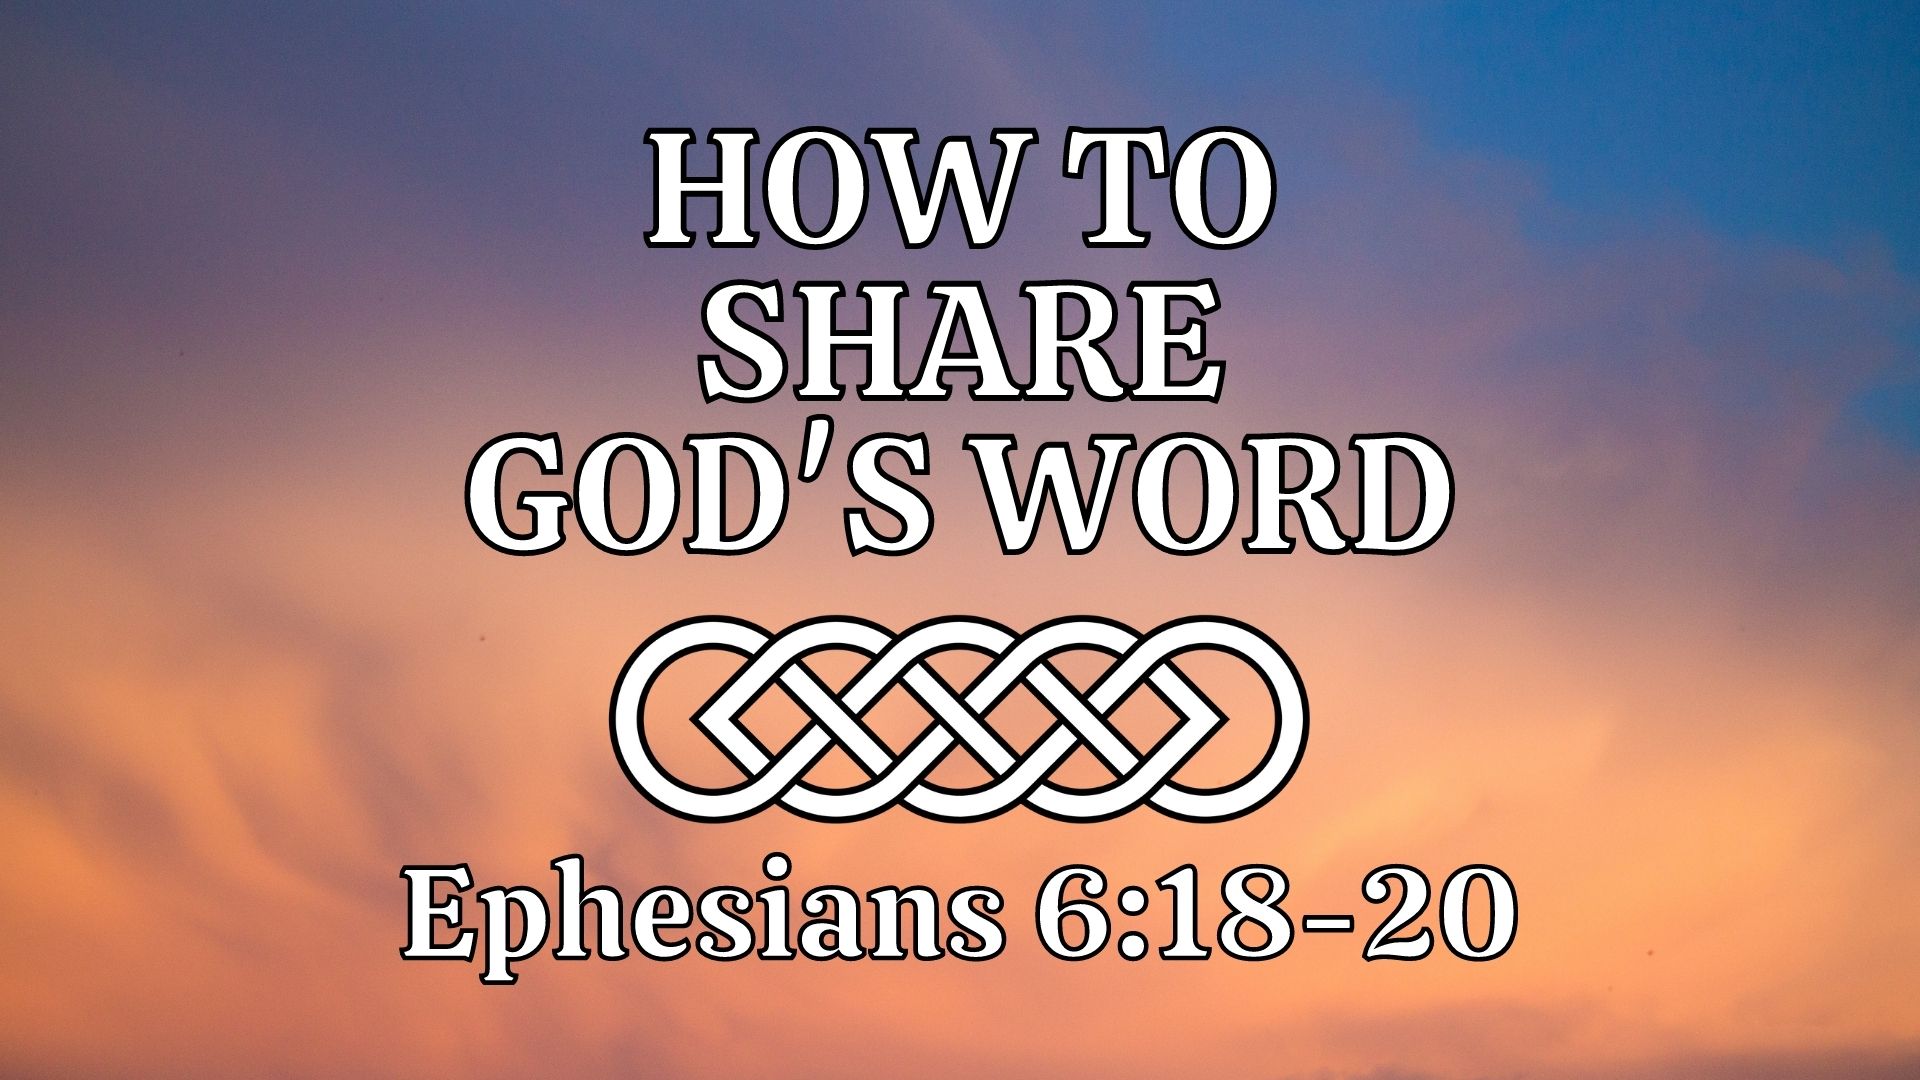 How to Share God's Word (Ephesians 6:18-20) Image